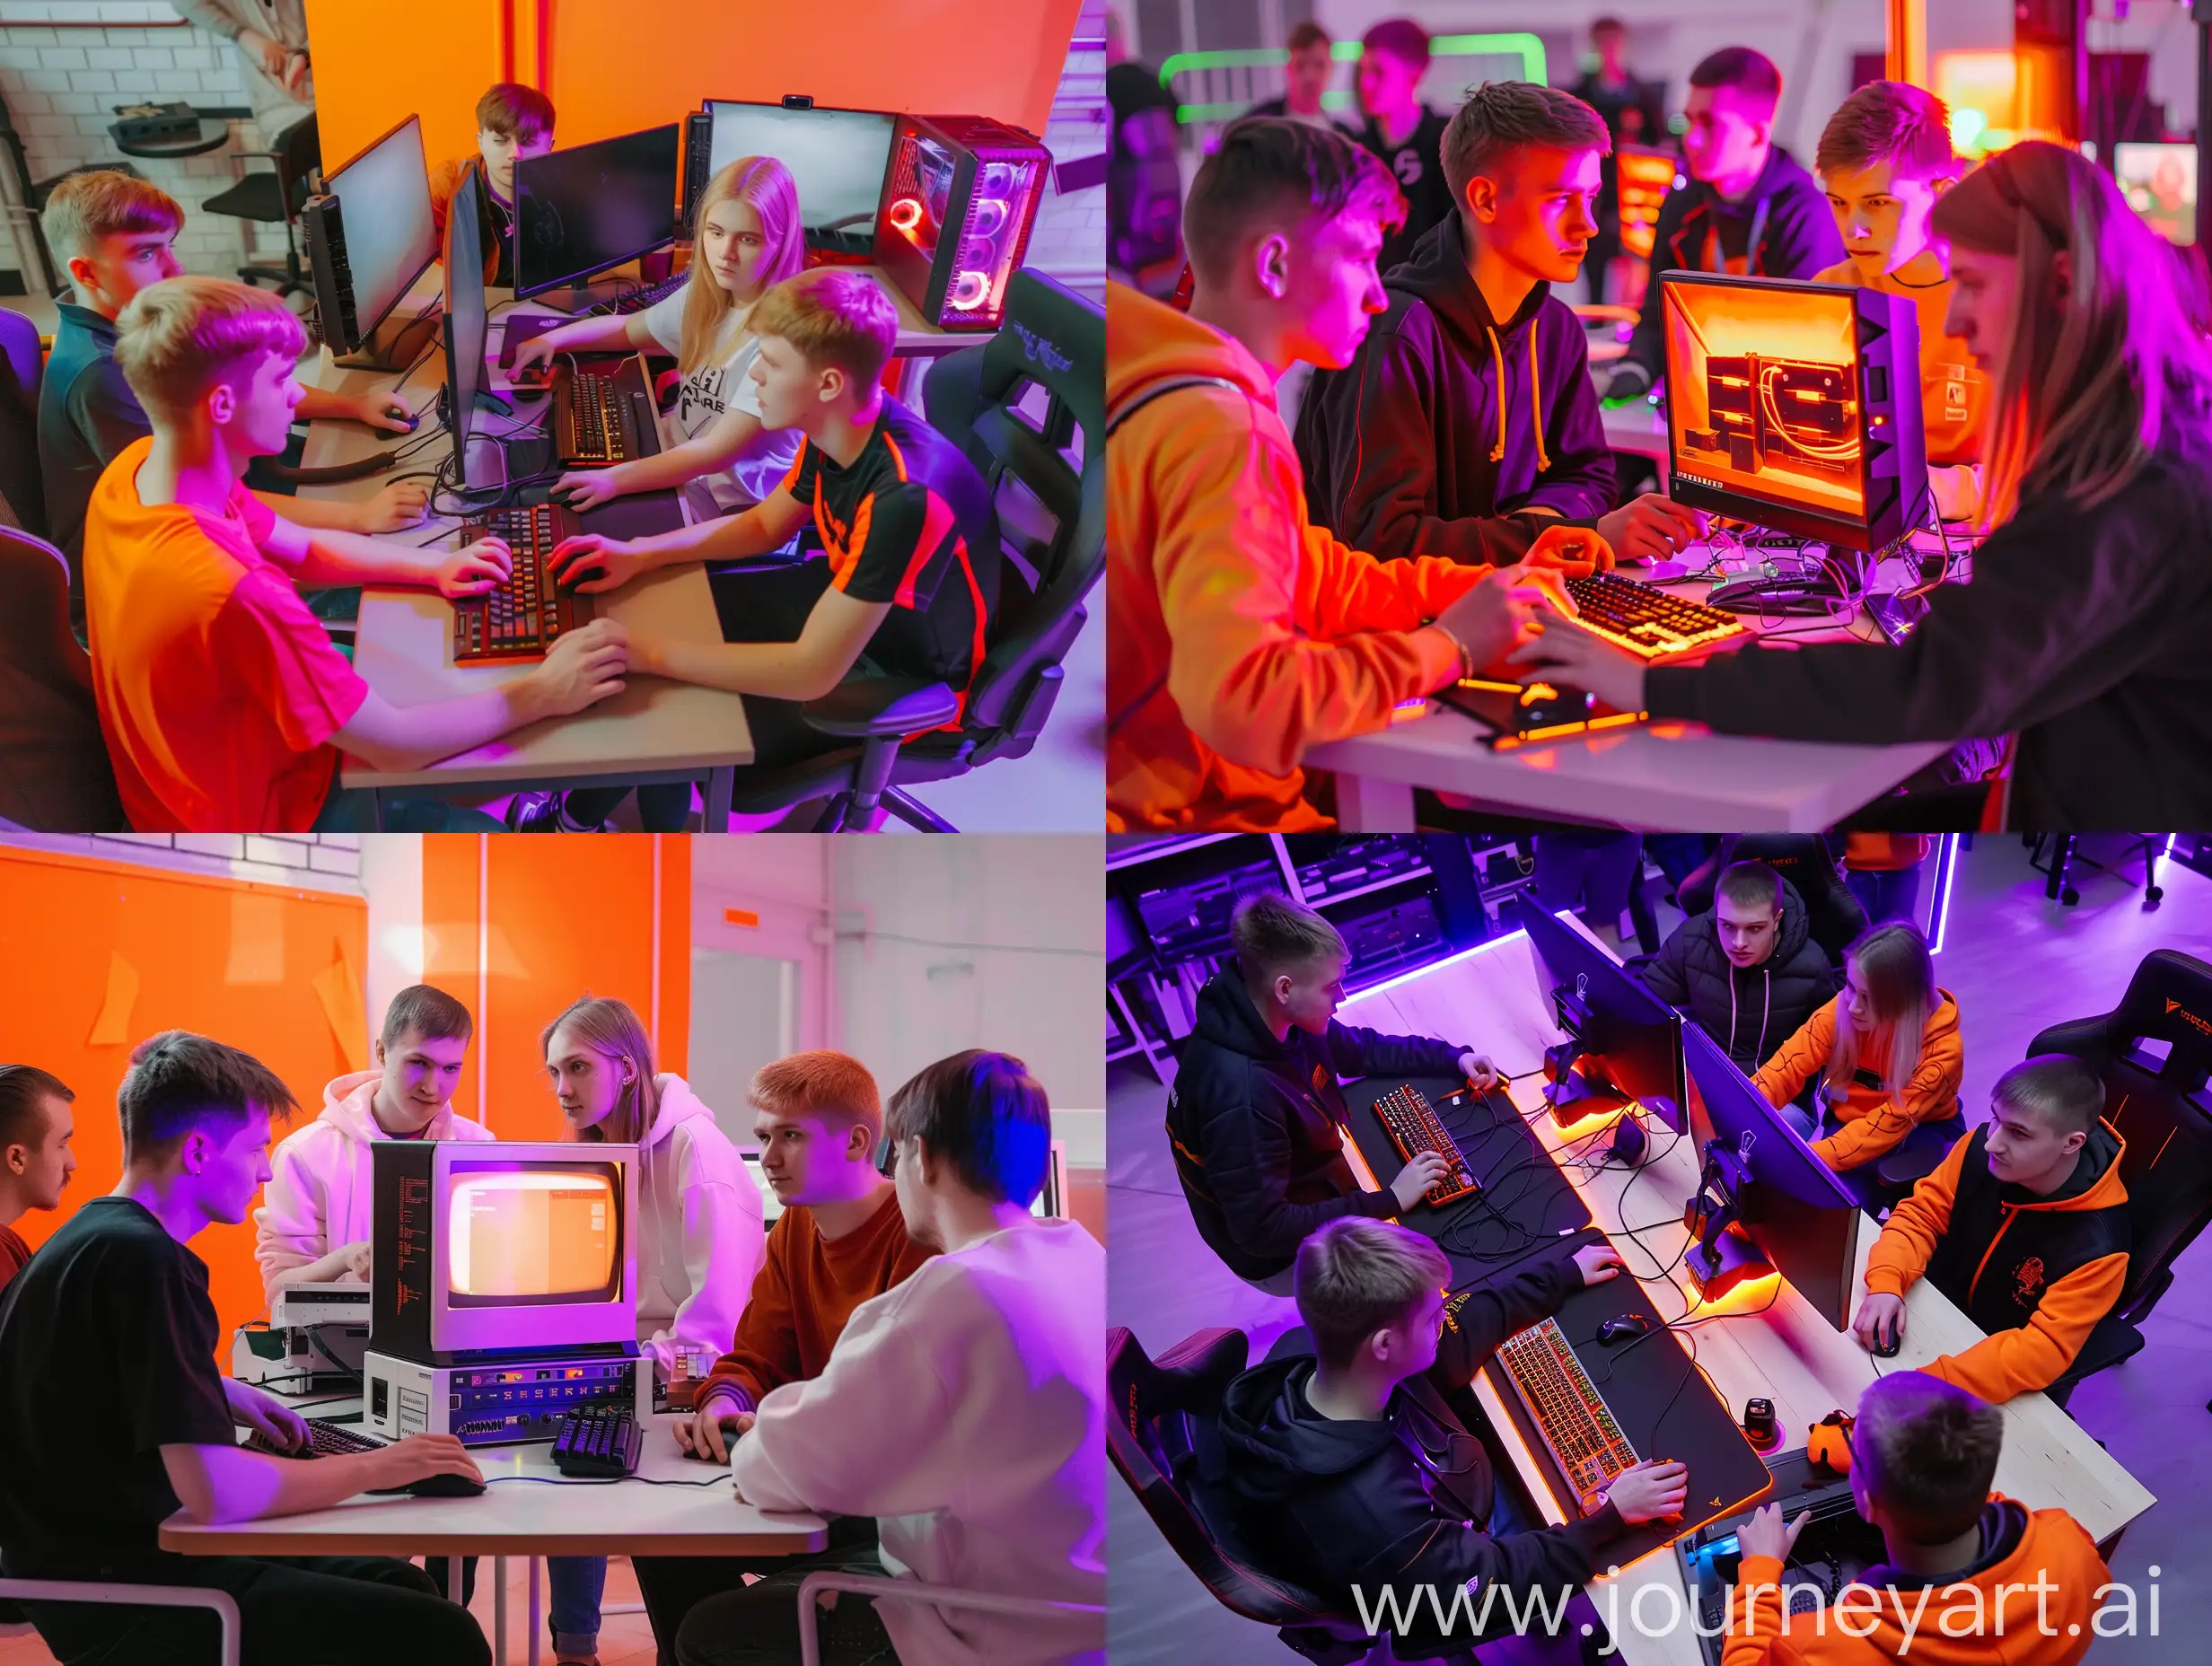 Russian-Cybersecurity-Team-Working-at-Computers-in-Orange-and-Purple-Setting